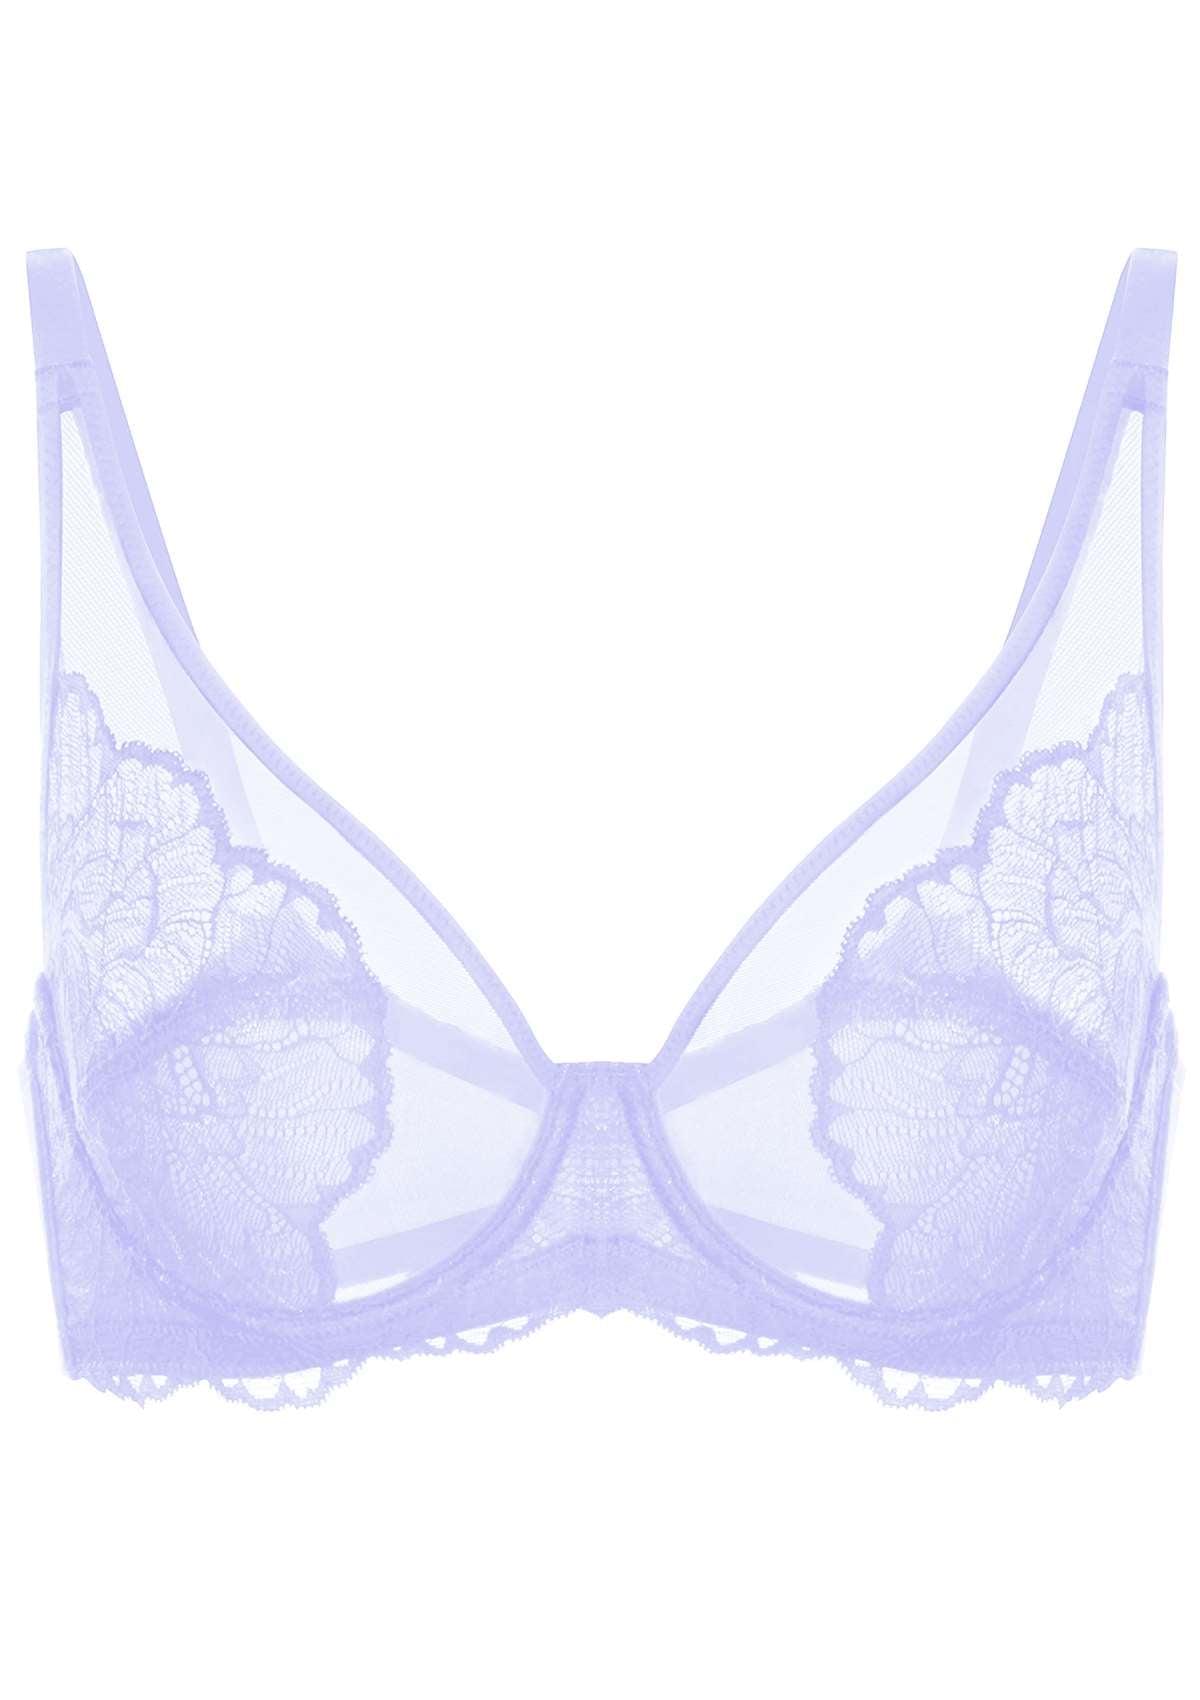 HSIA Blossom Transparent Lace Bra: Plus Size Wired Back Smoothing Bra - Light Purple / 40 / H